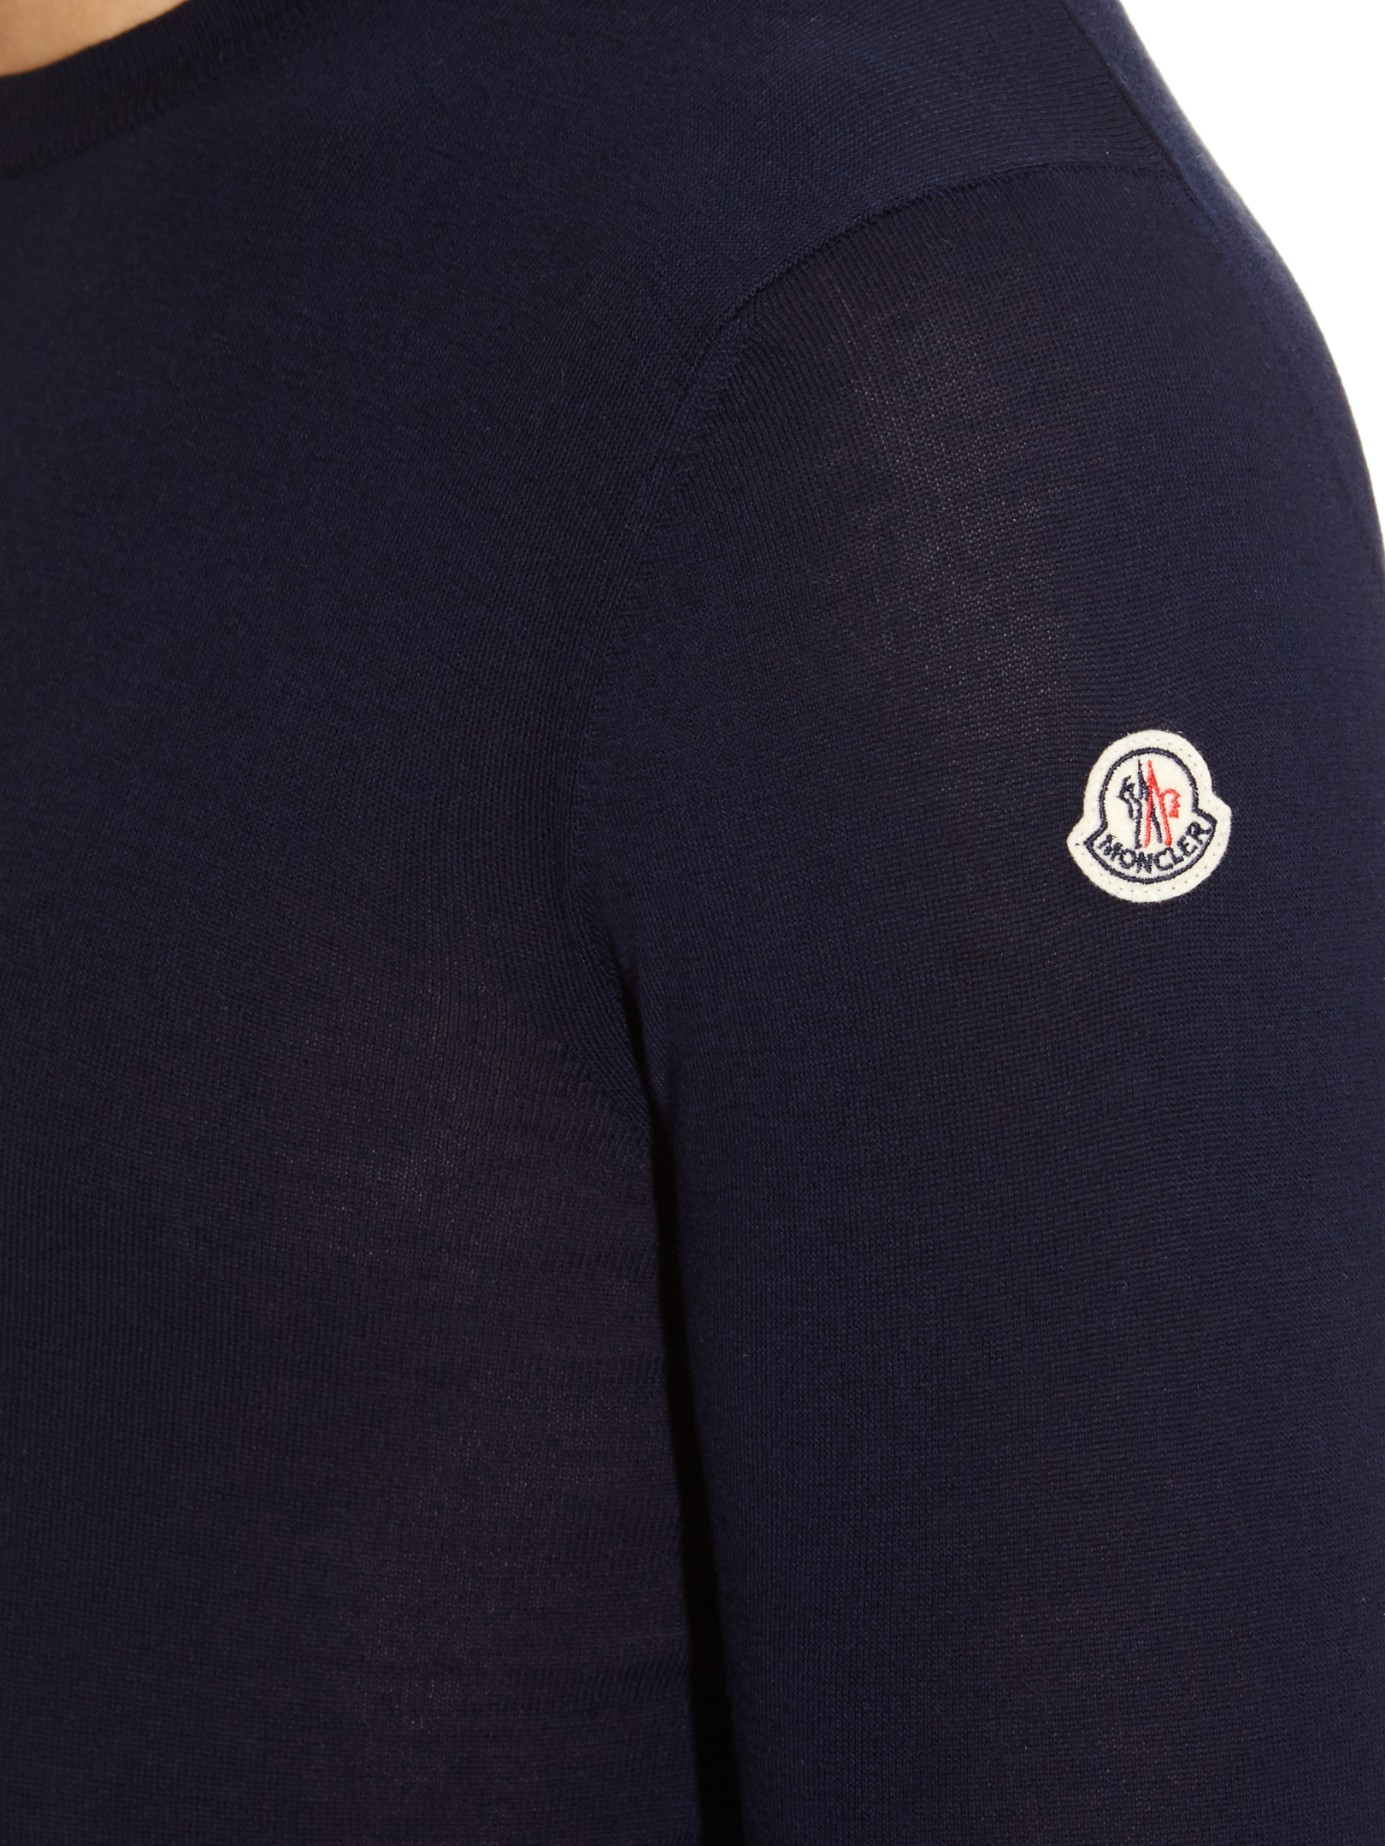 Moncler Long-sleeved Cotton Knit Sweater in Navy (Blue) for Men - Lyst